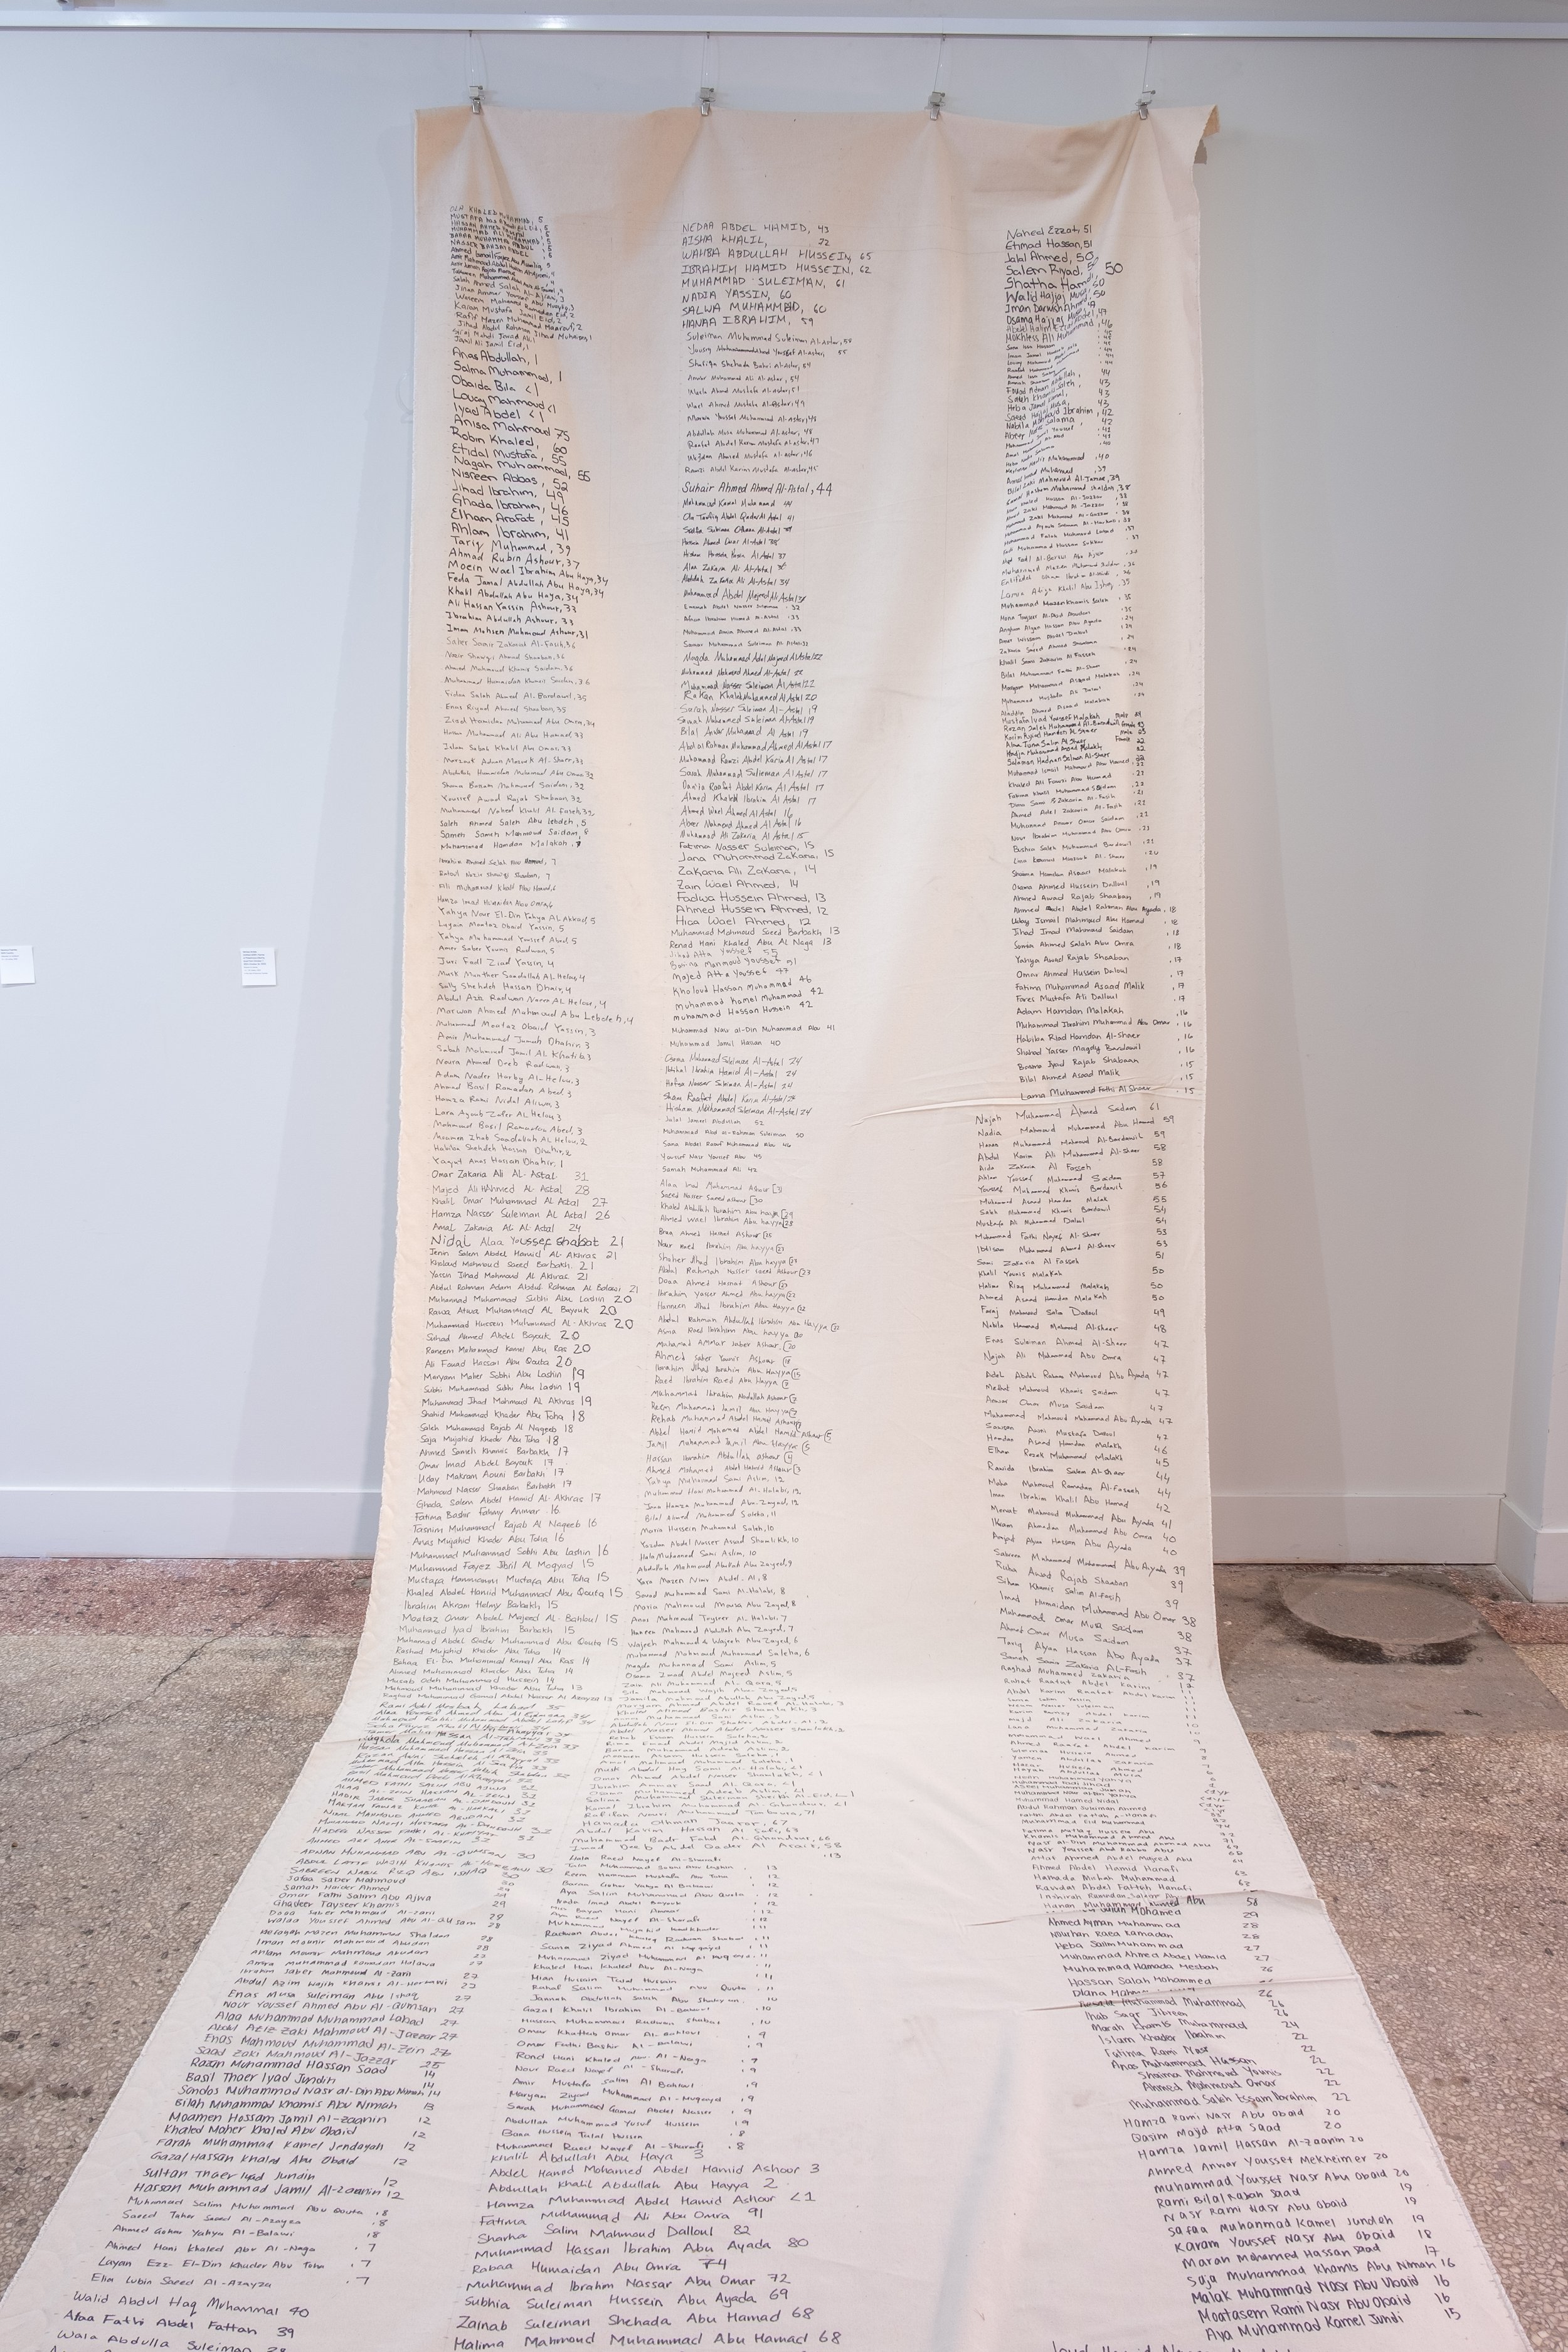 Veronica Fuentes, 6000+ Names of Palestinians killed by Israel from October 7, 2023 - October 26, 2023